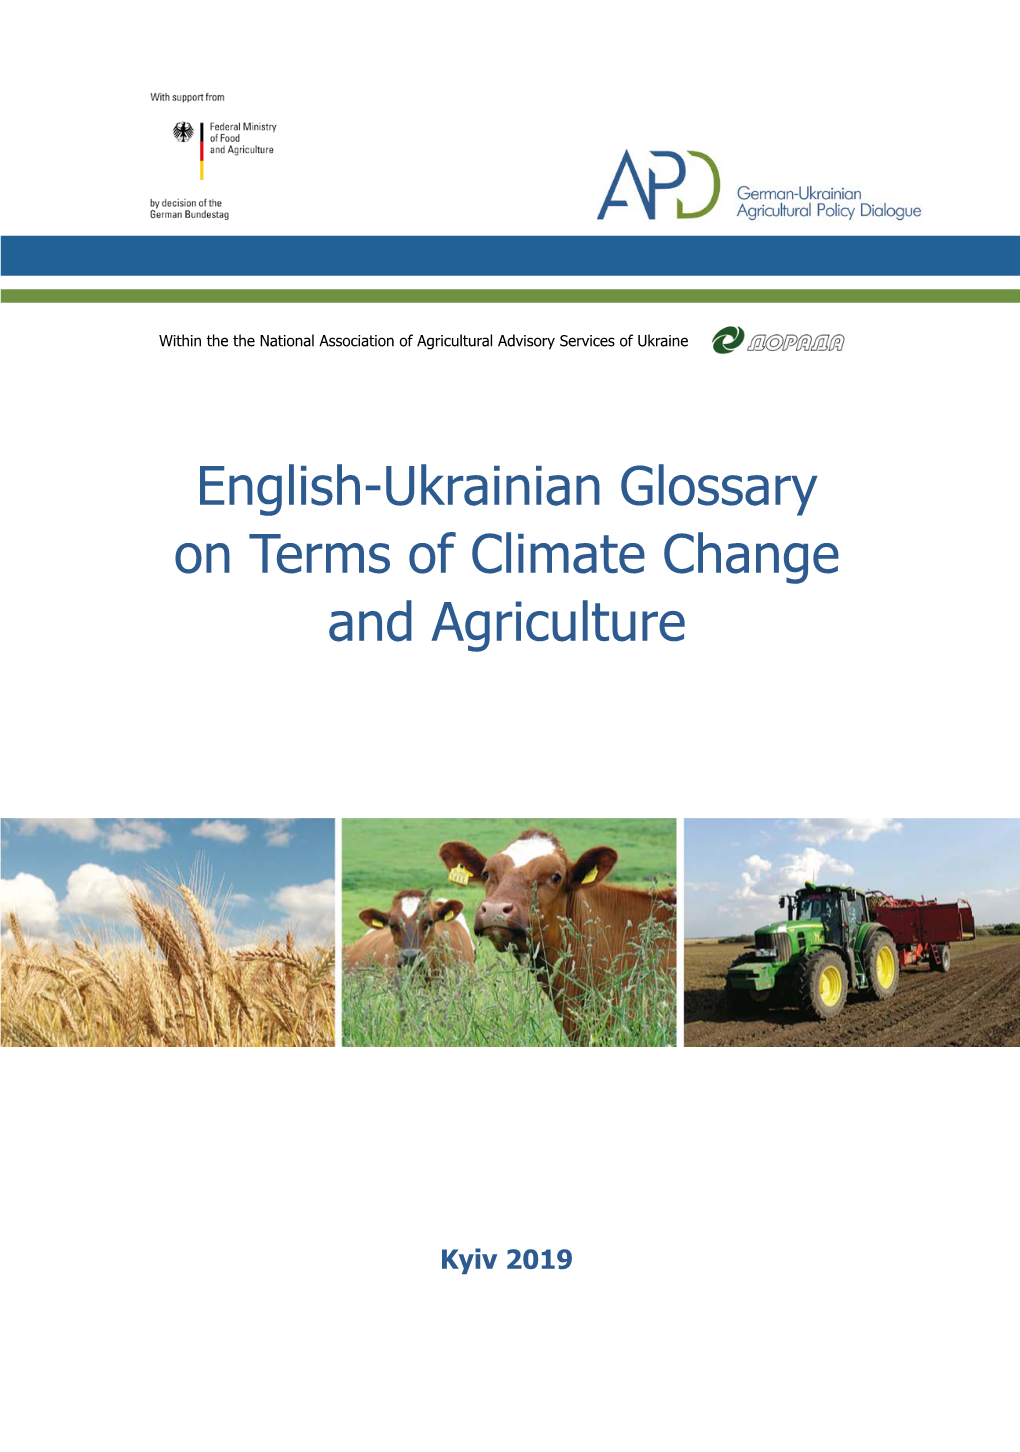 English-Ukrainian Glossary on Terms of Climate Change and Agriculture